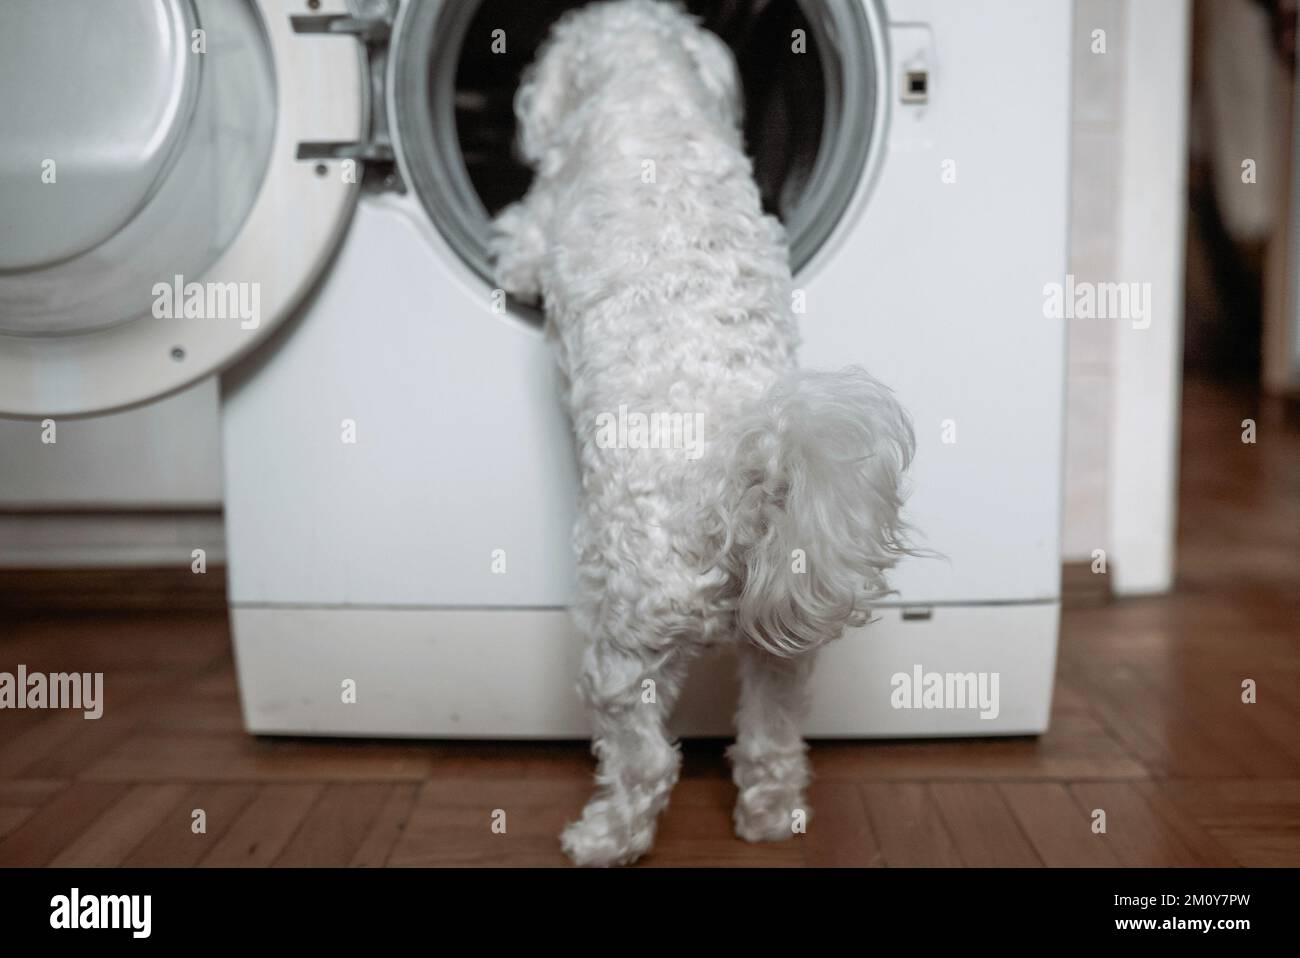 Cute little white dog looking in to washing machine. Close view Stock Photo